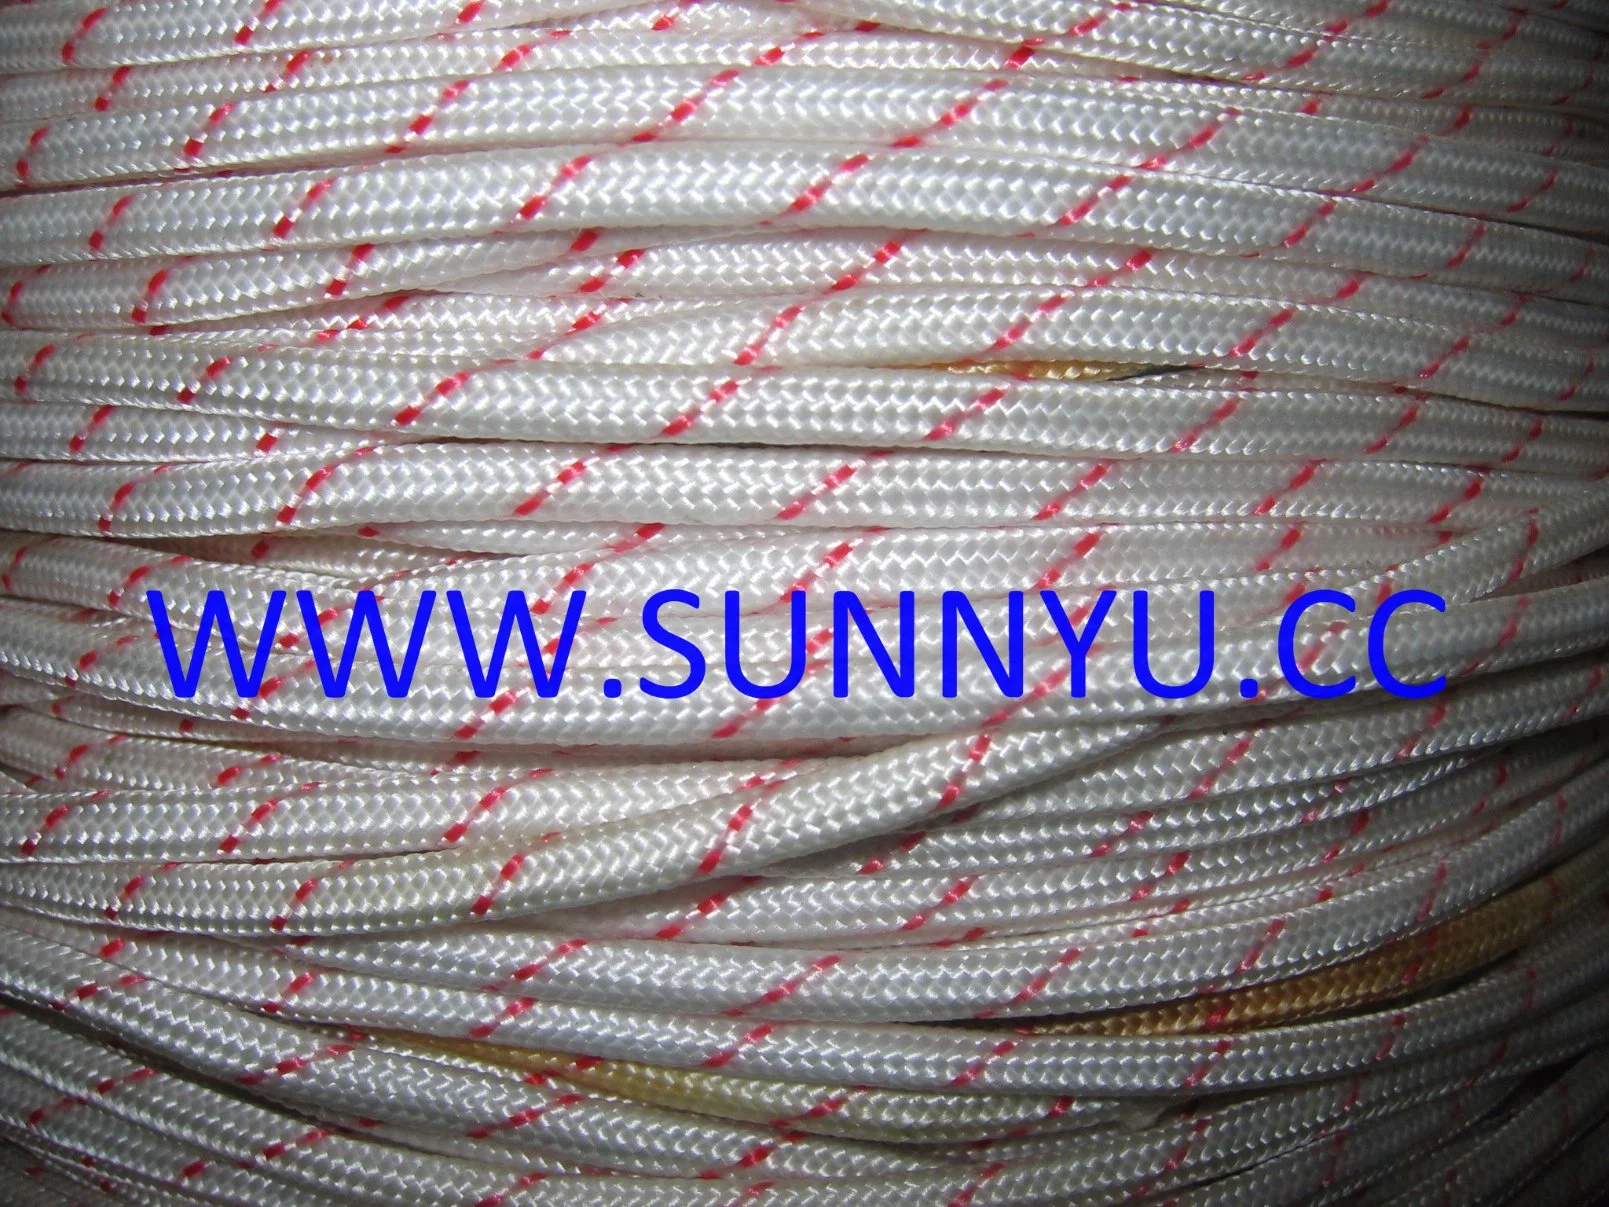 Colored Plastic Braided Starter Rope